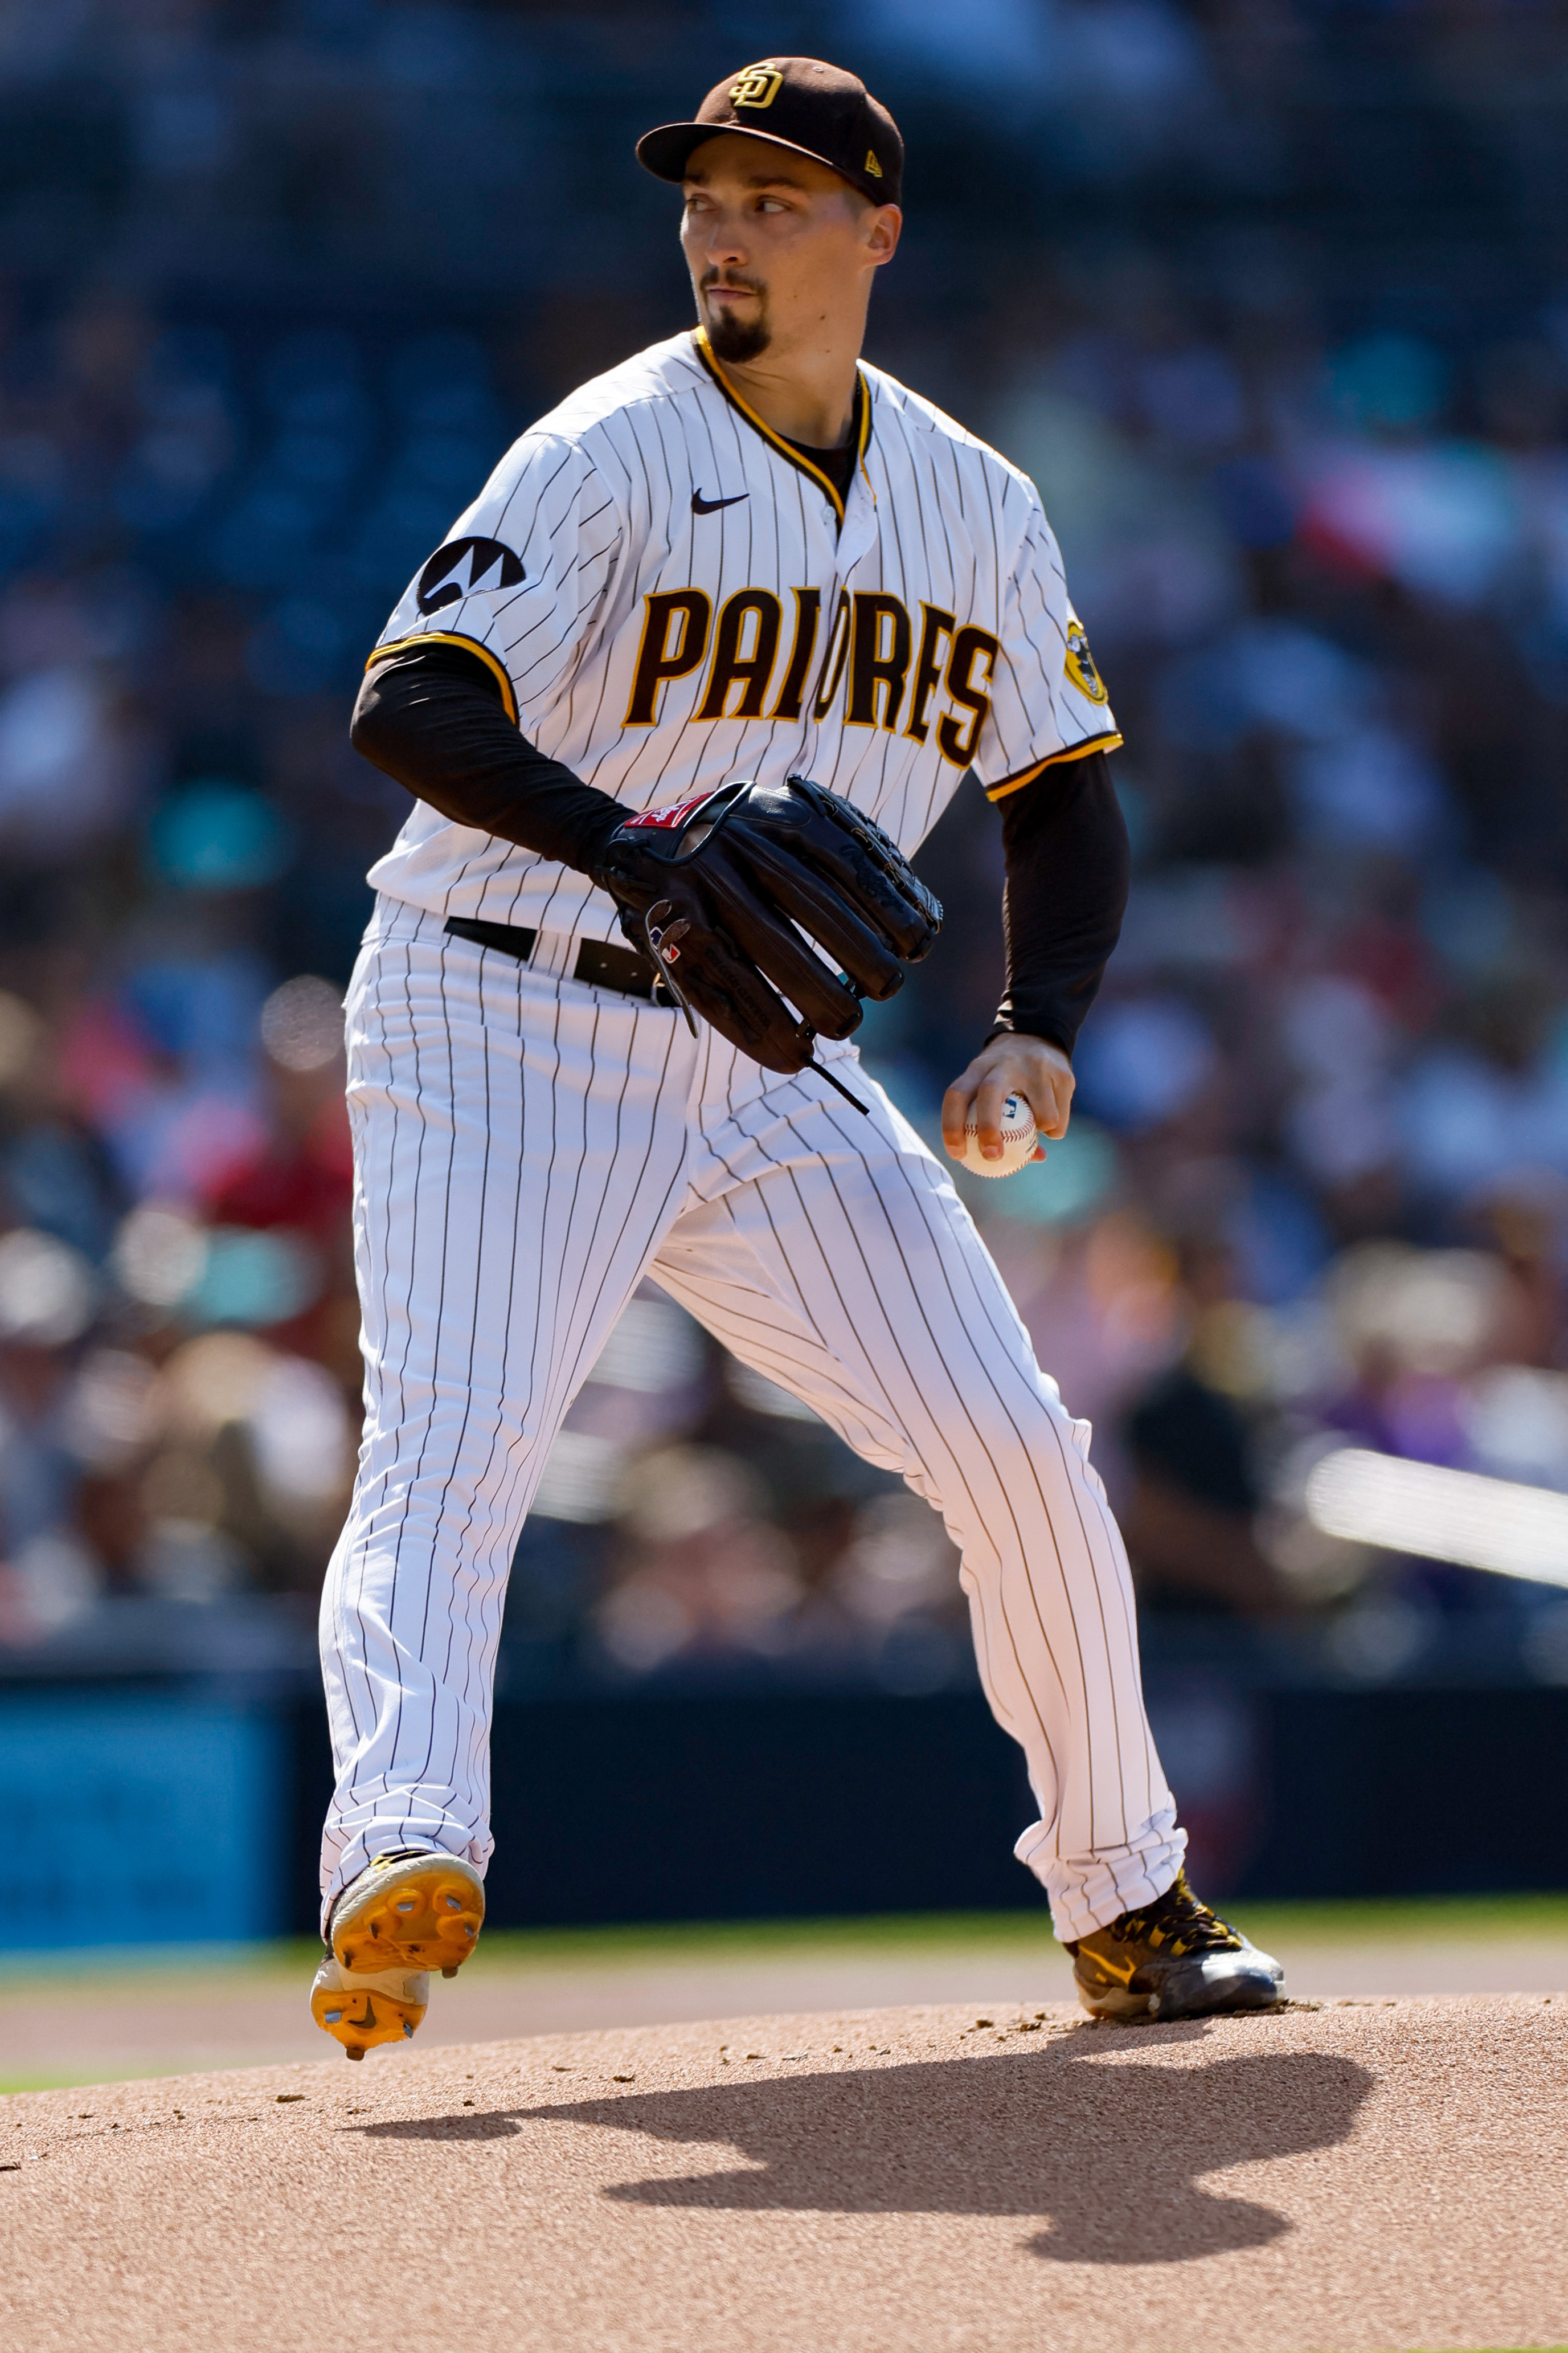 Blake Snell and Trent Grisham lead San Diego Padres over LA